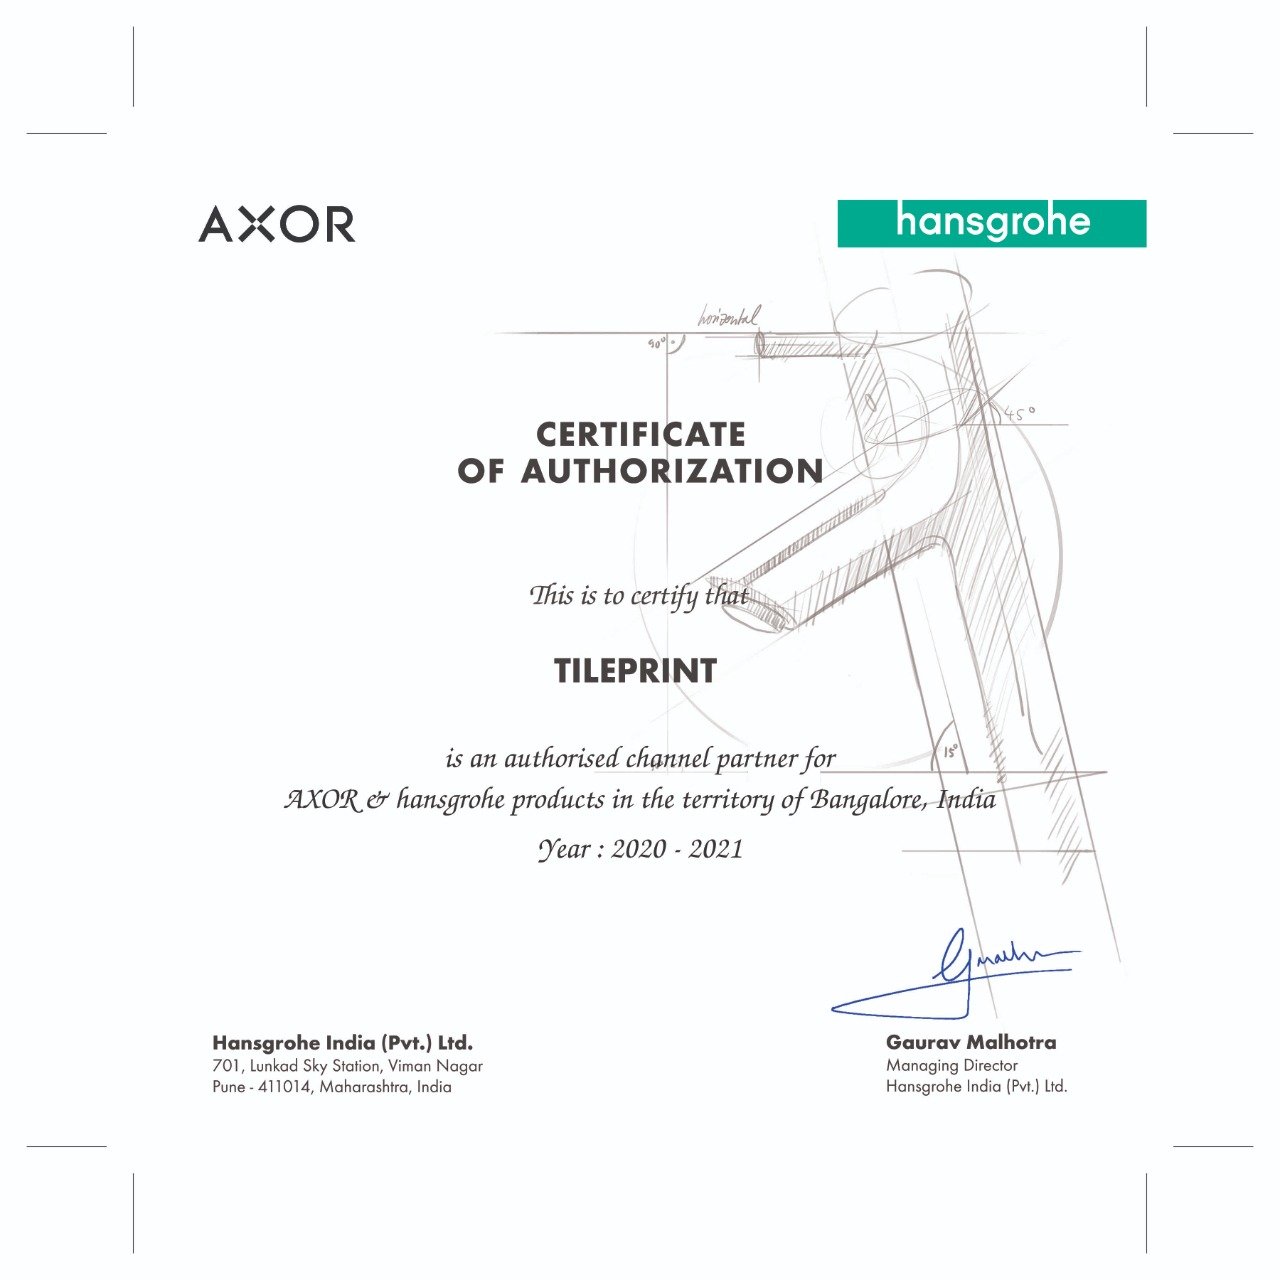 Hansgrohe Certification